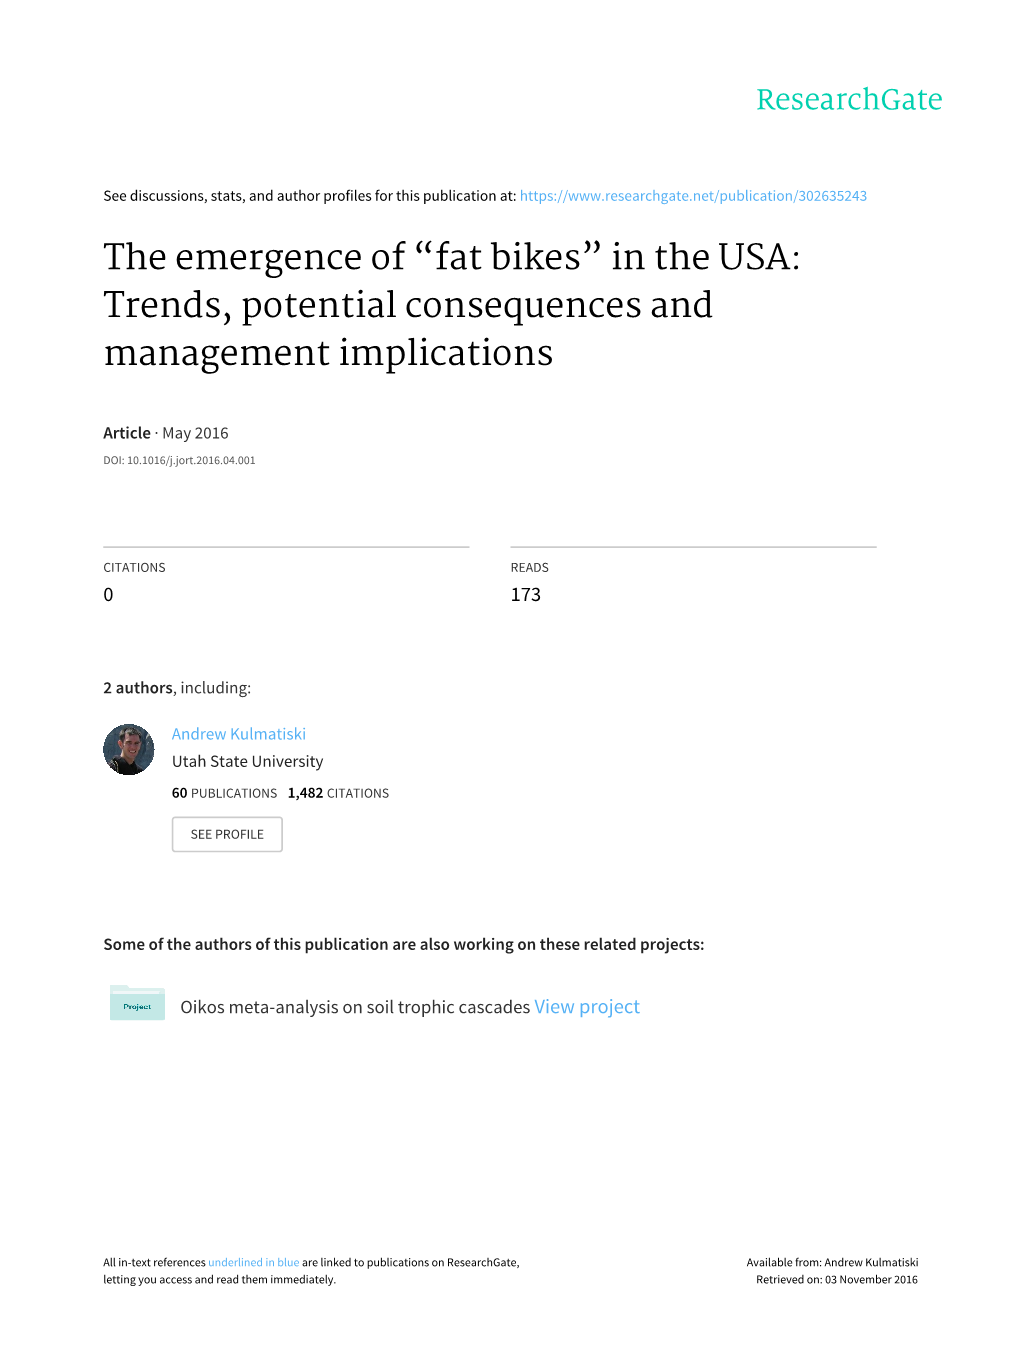 Fat Bikes” in the USA: Trends, Potential Consequences and Management Implications